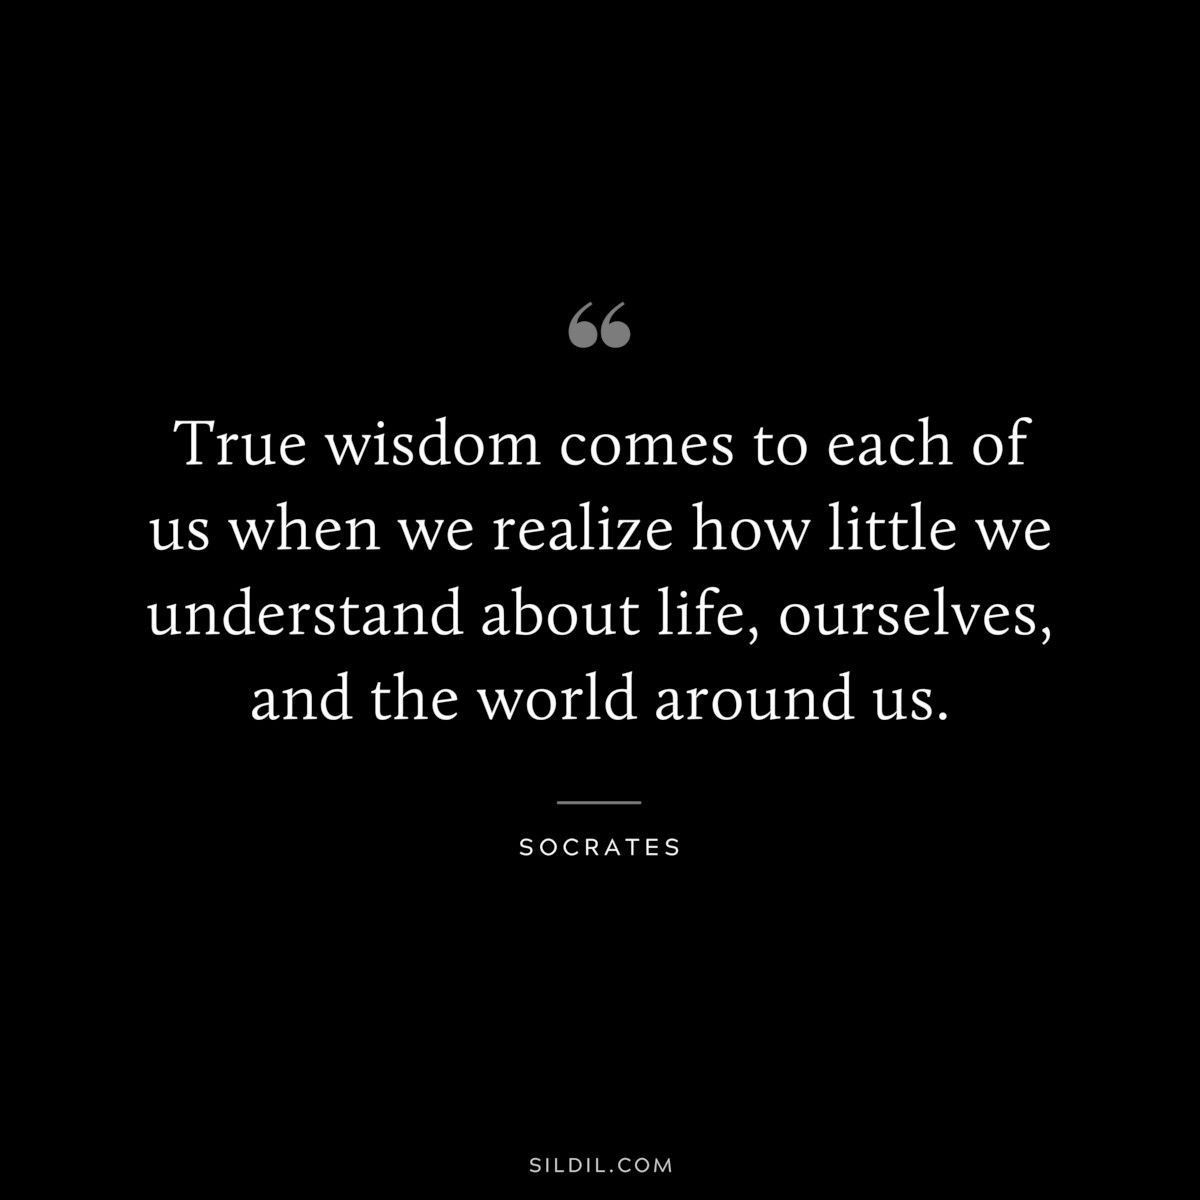 True wisdom comes to each of us when we realize how little we understand about life, ourselves, and the world around us. ― Socrates